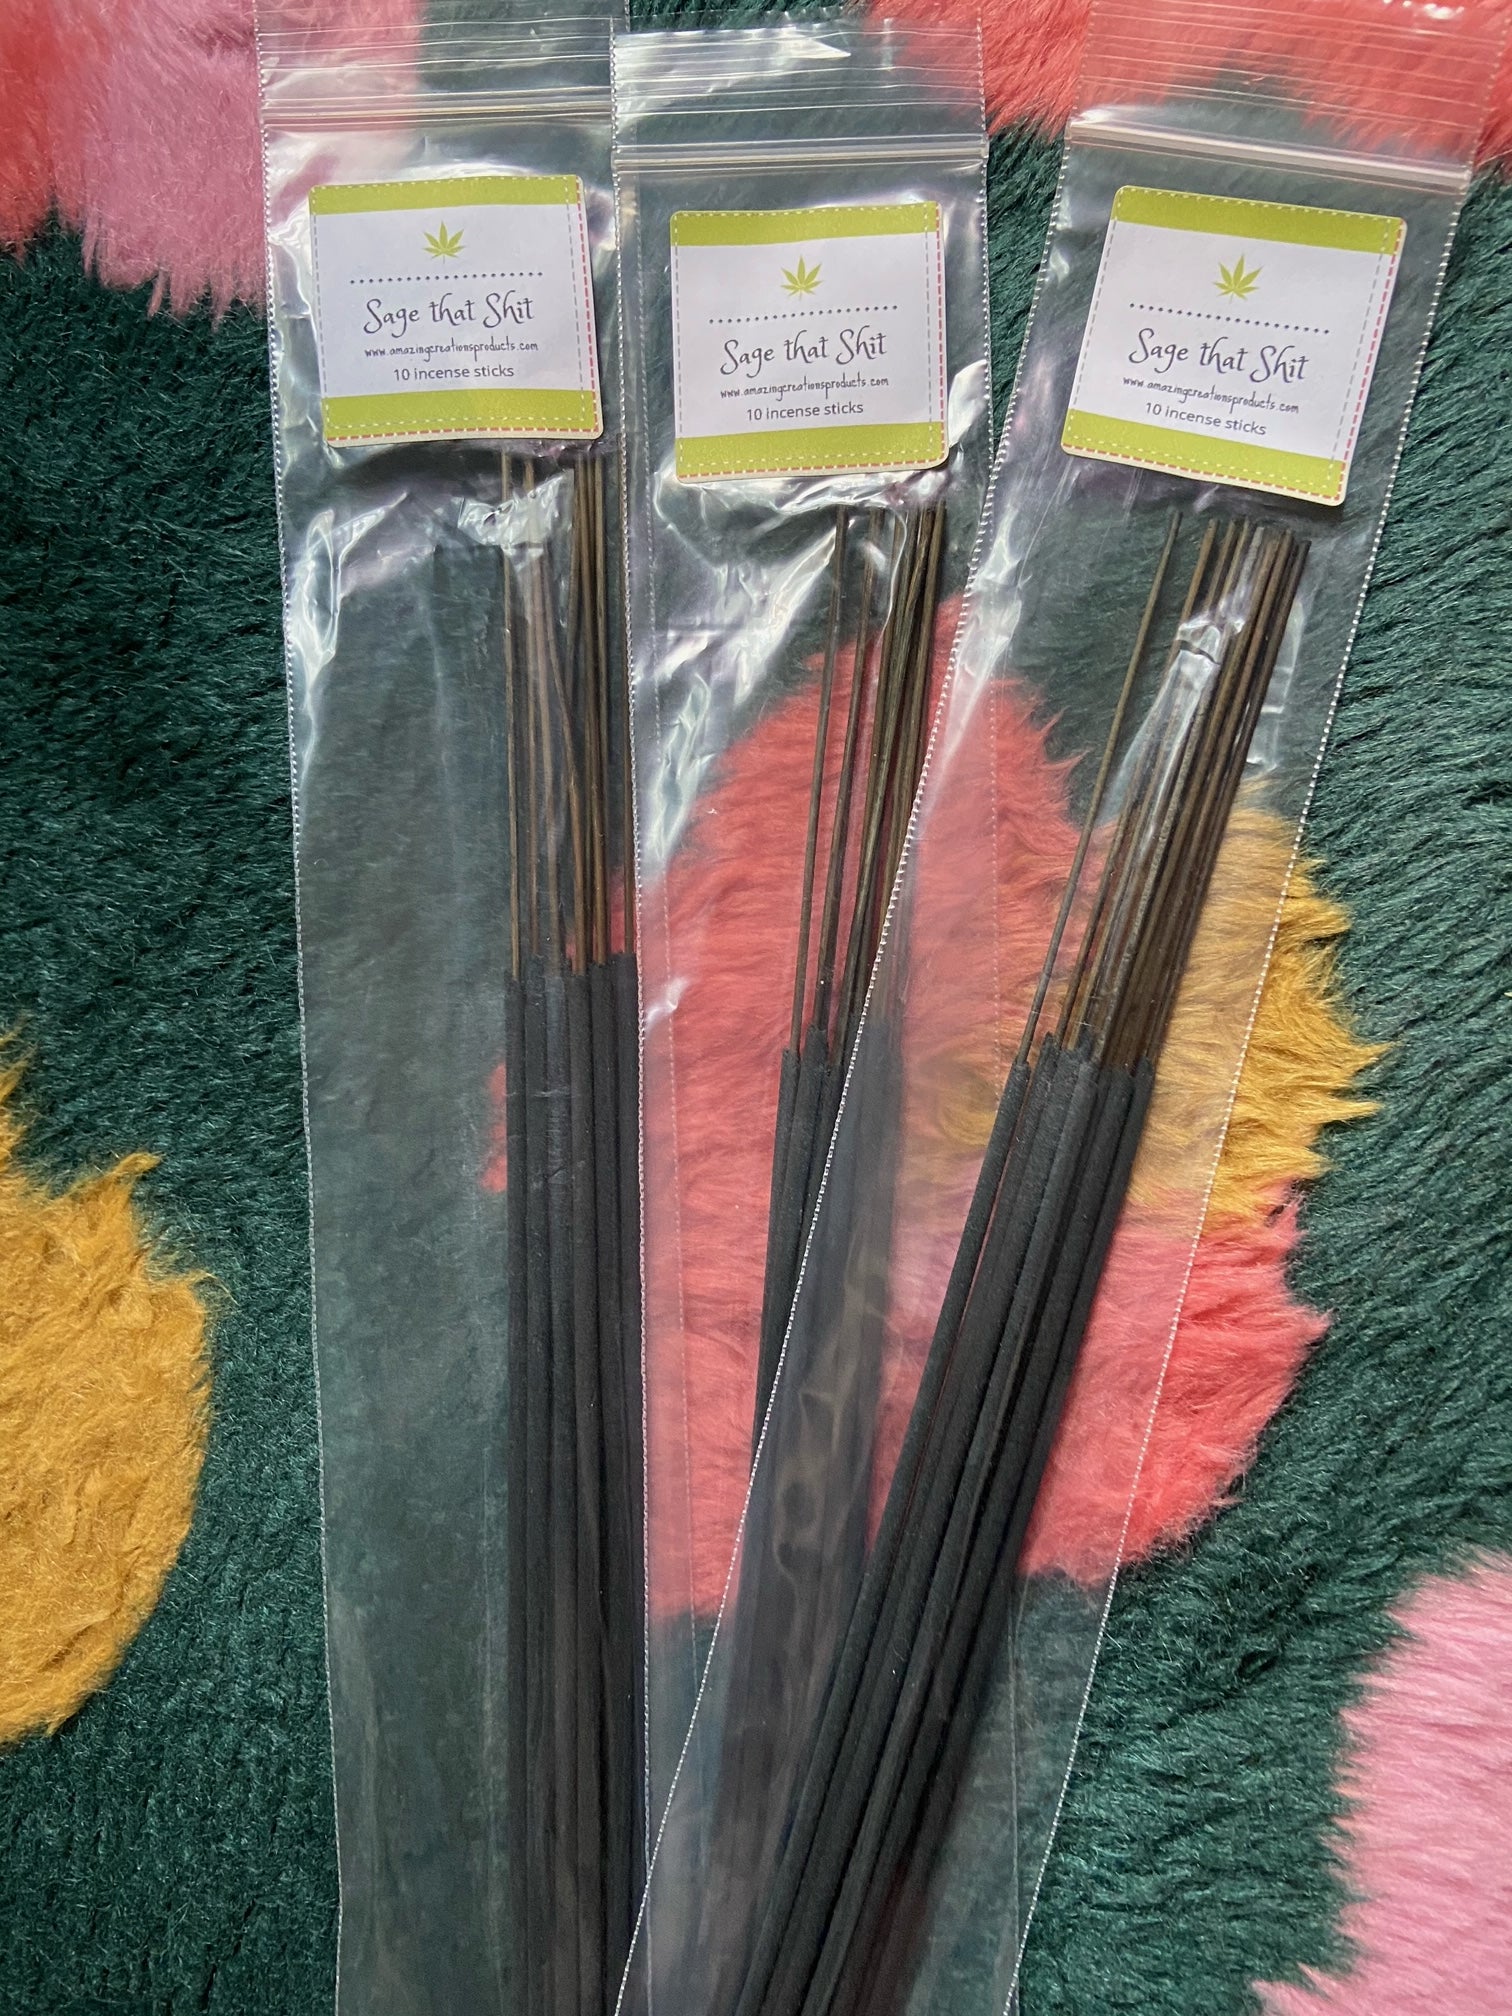  Sage That Shit Incense Sticks -  available at Amazing Creations Products . Grab yours for $2.00 today!